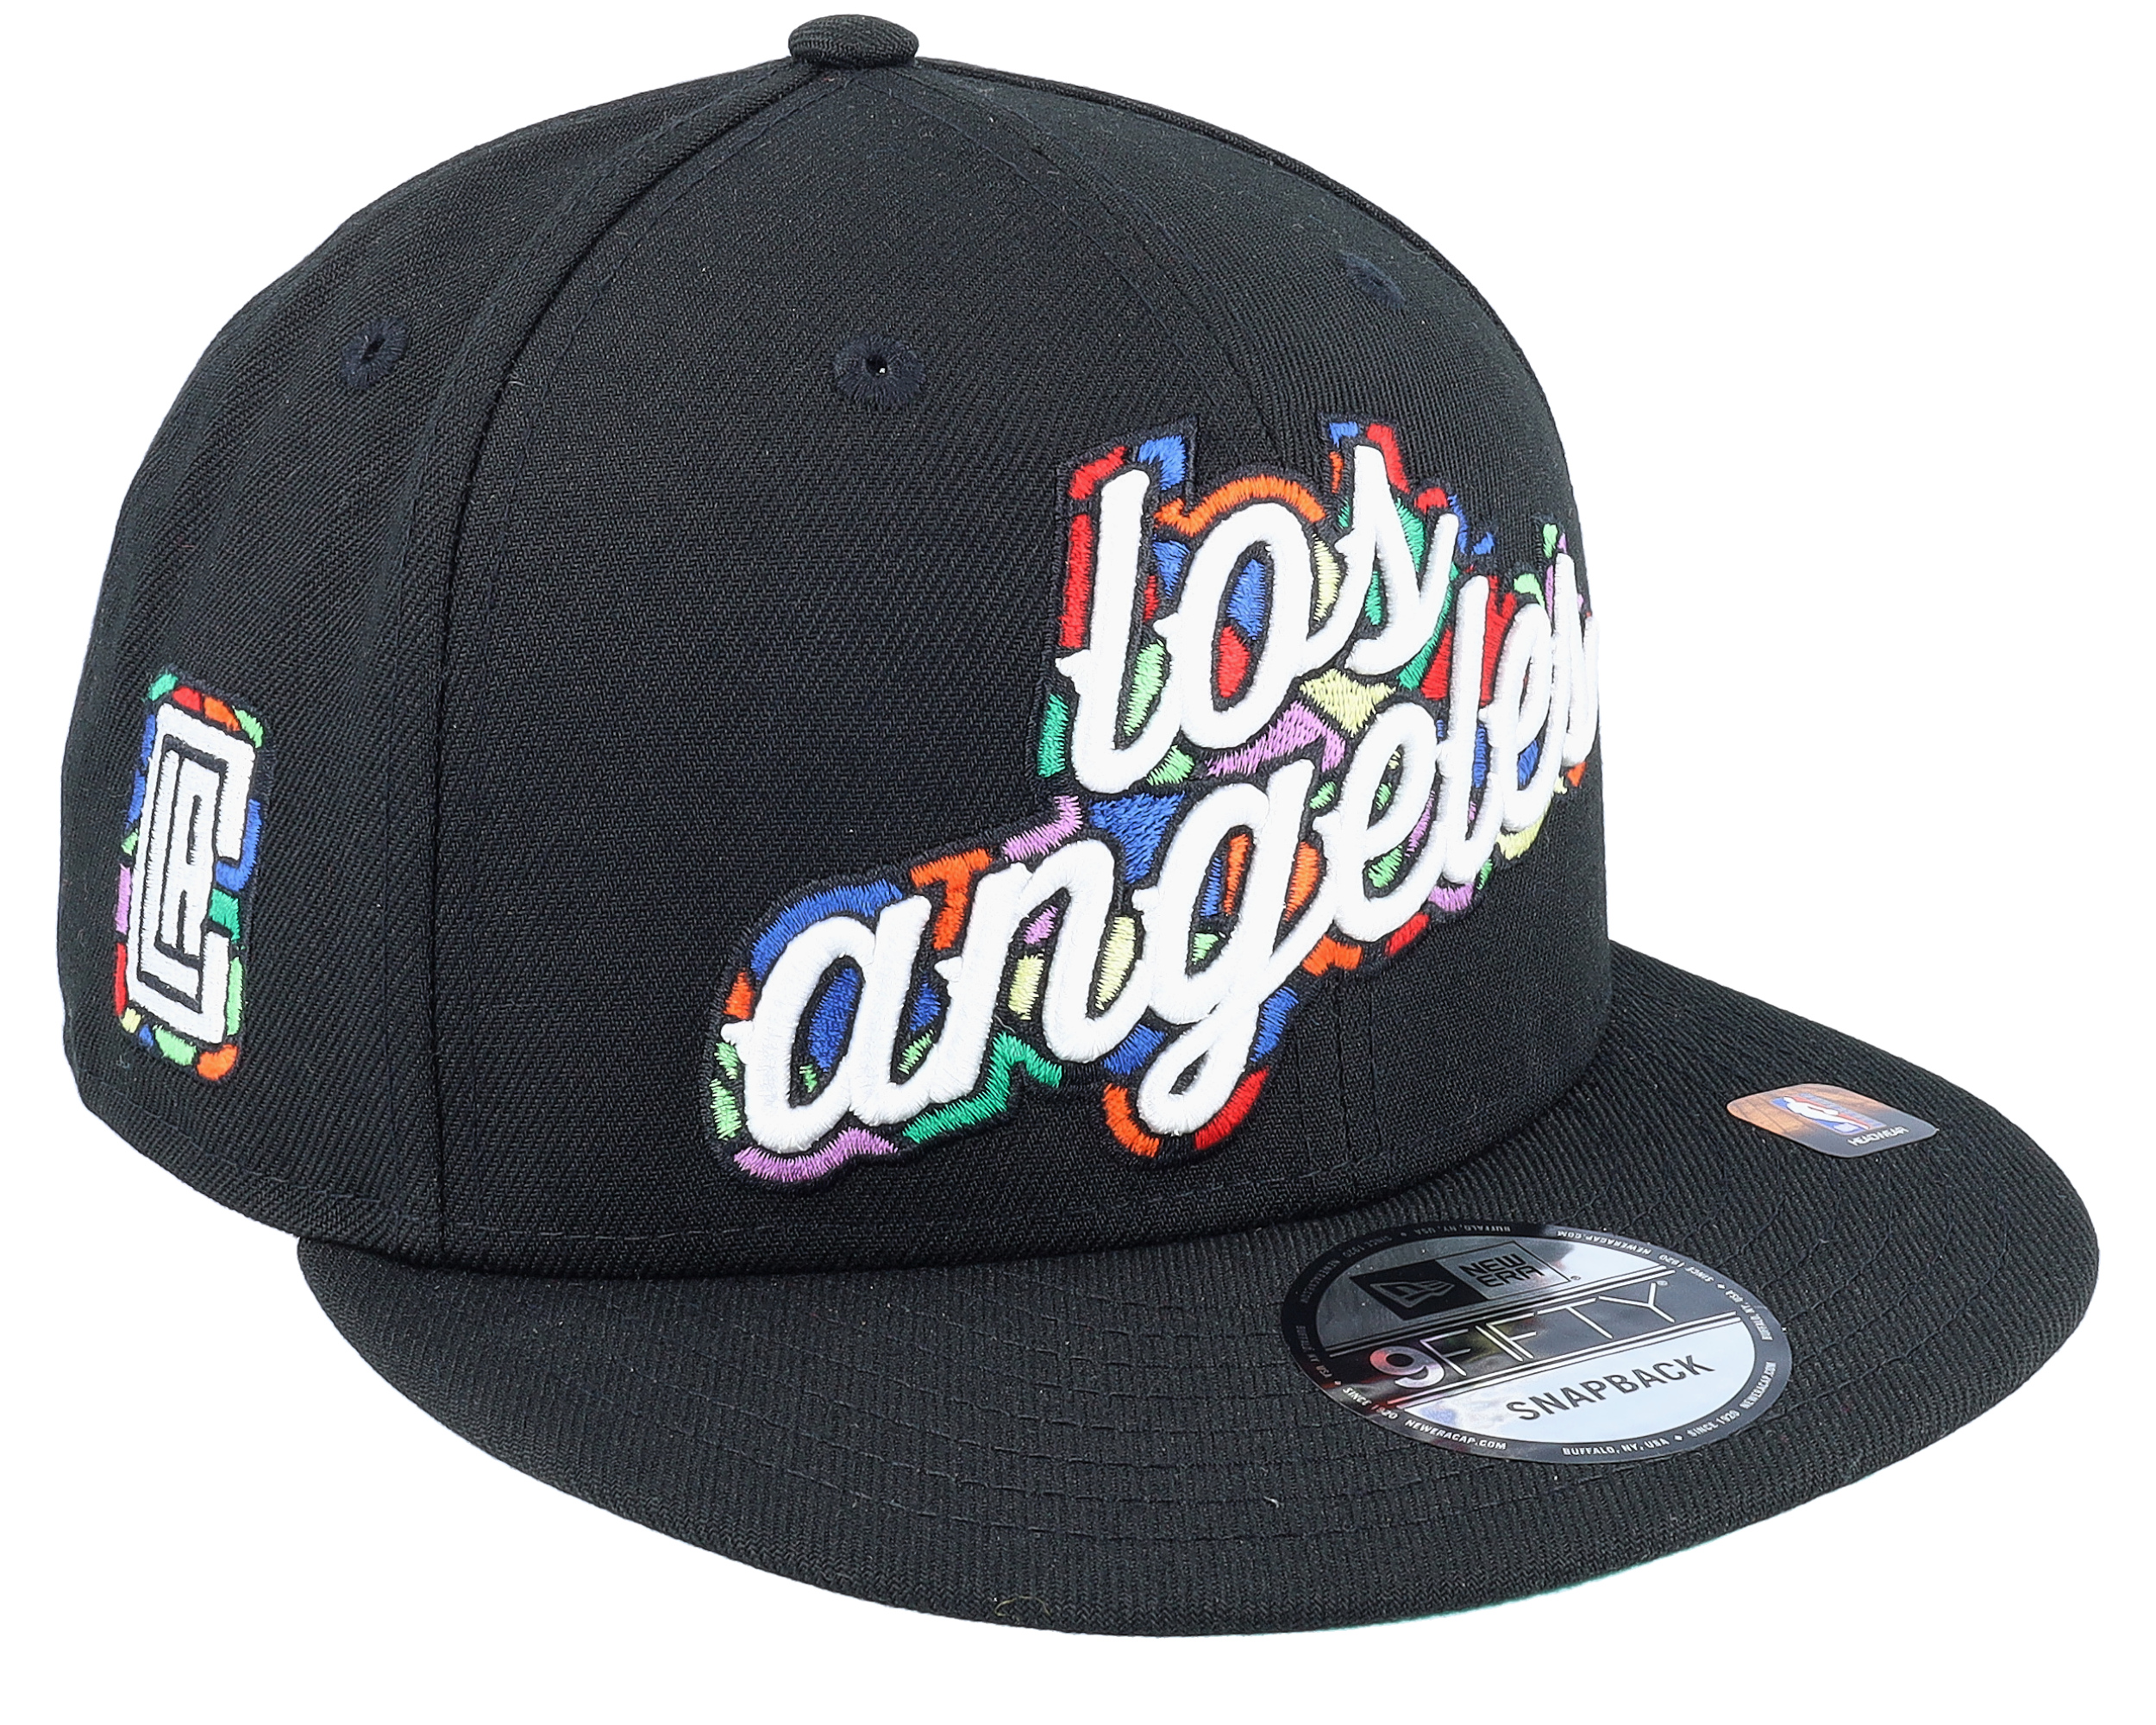 MuzeMerch - Los Angeles Clippers NBA Collection 9FIFTY